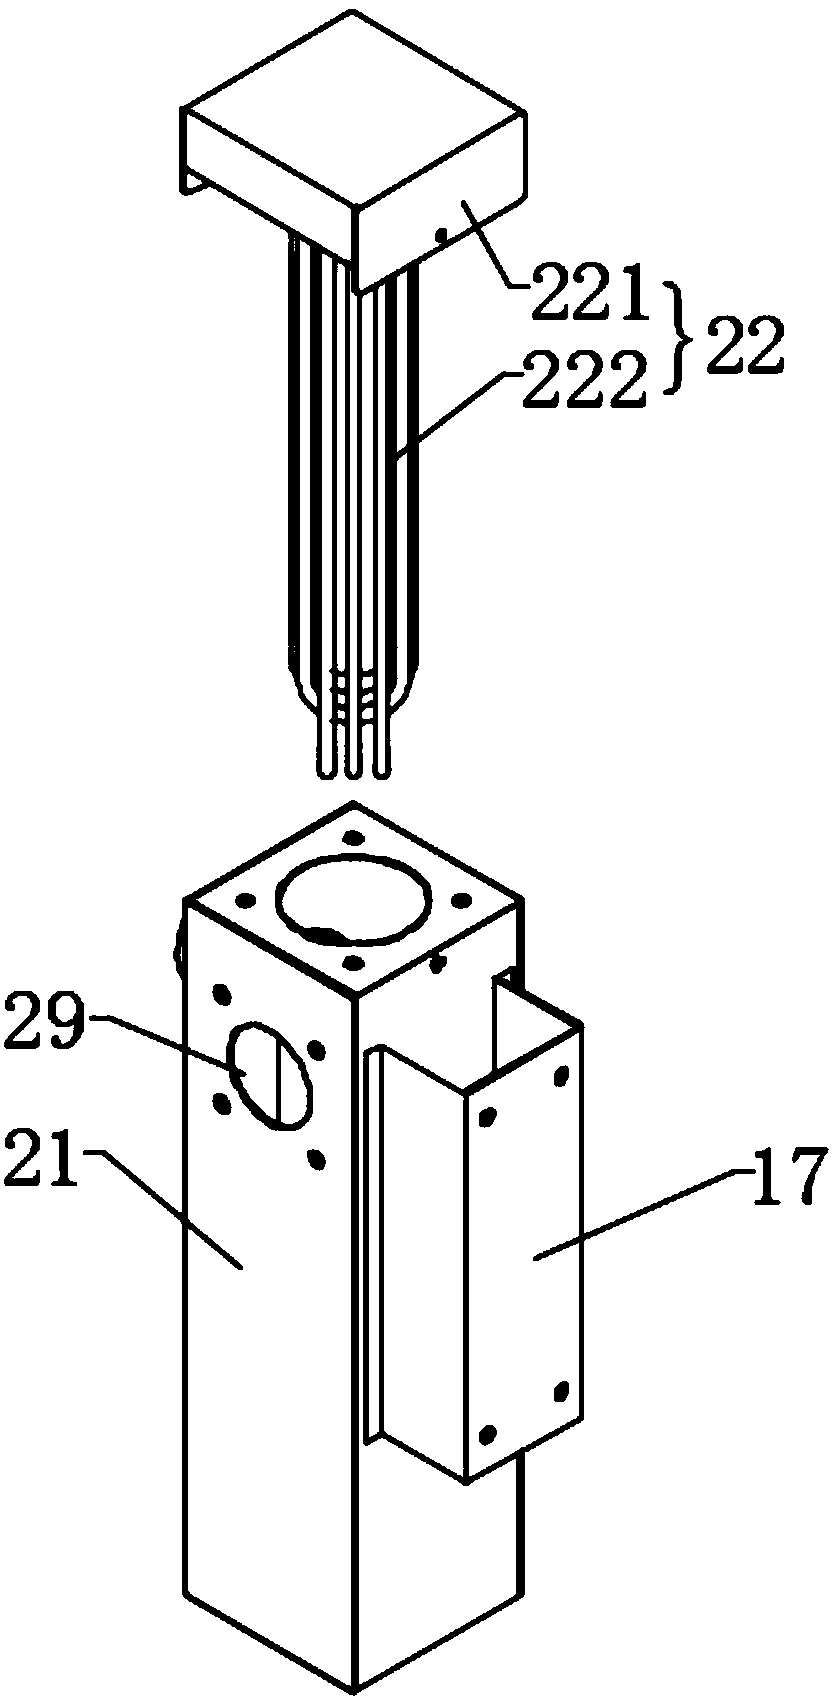 Airflow heating device